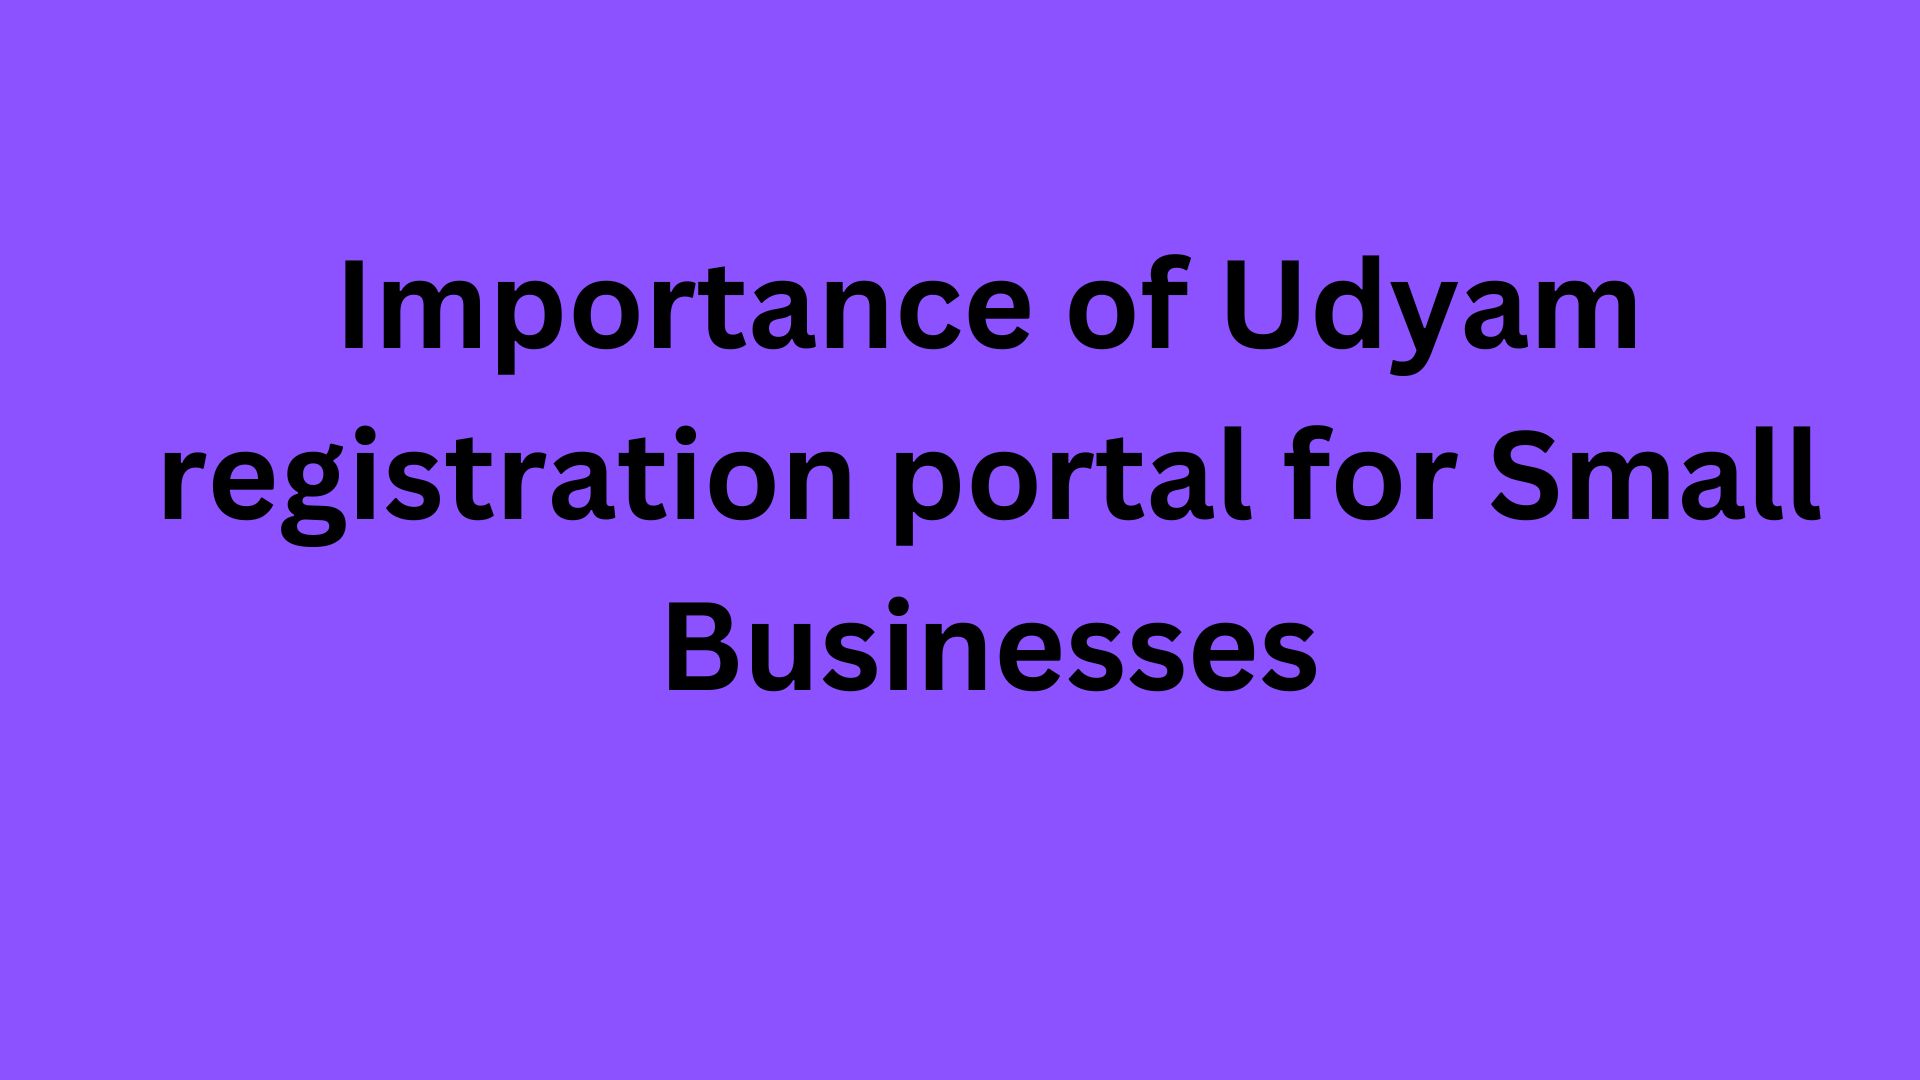 Importance of Udyam registration portal for Small Businesses